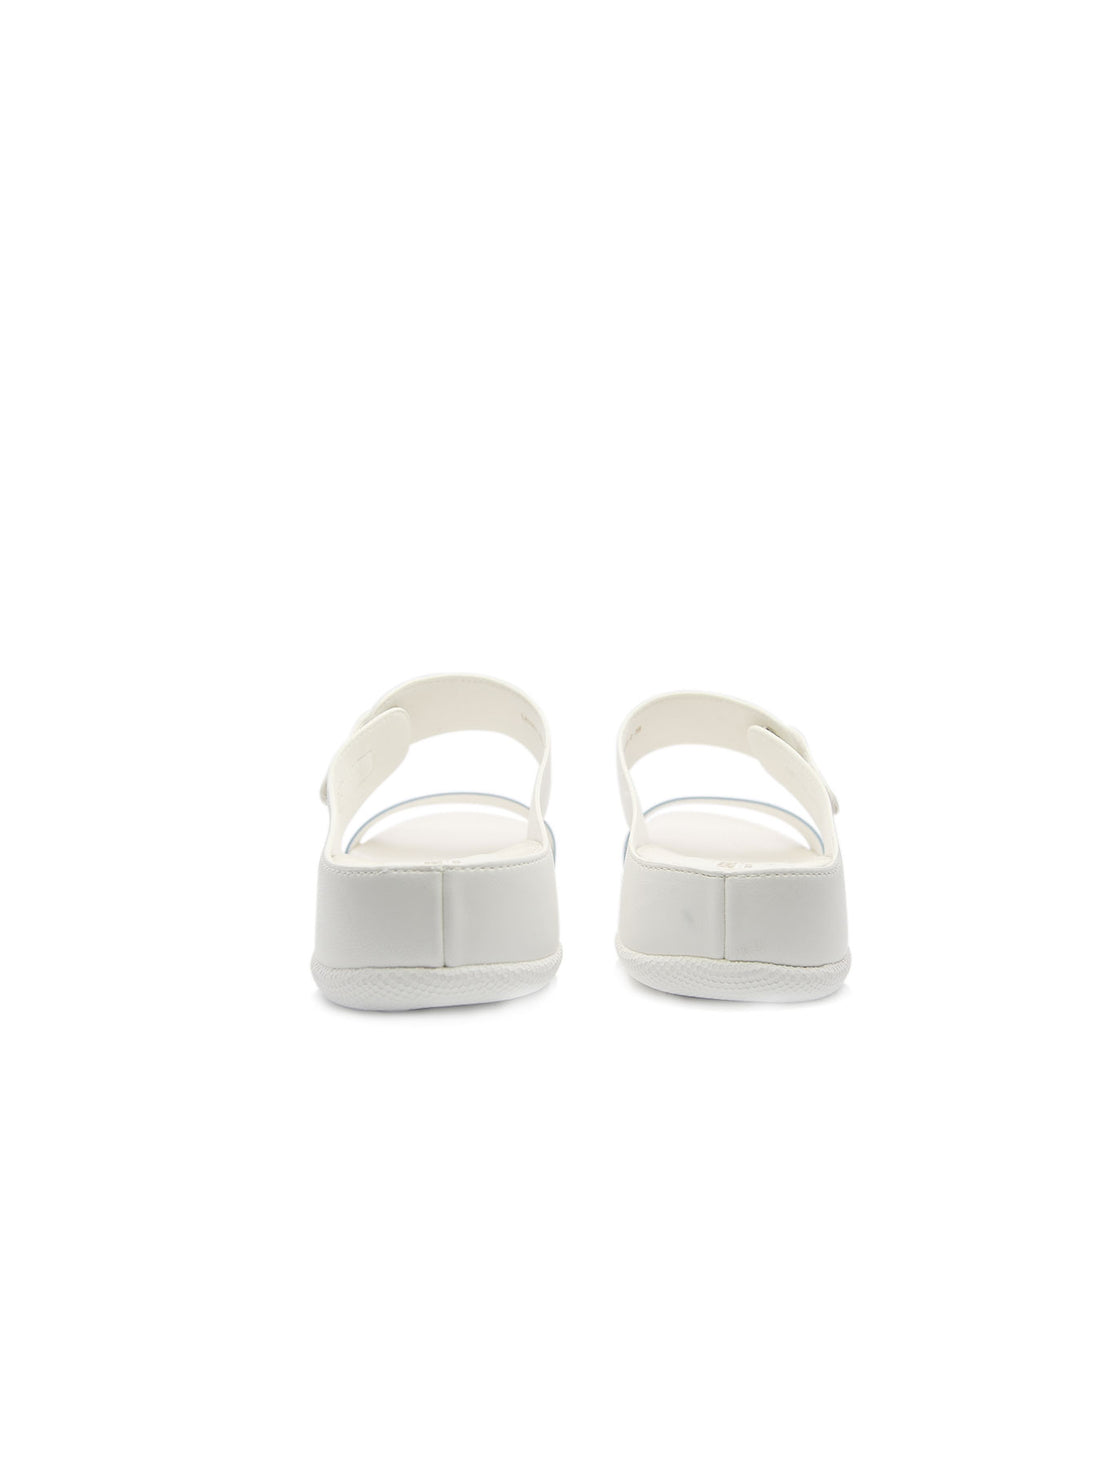 Larrie White Dual Strap Stylish Sandals